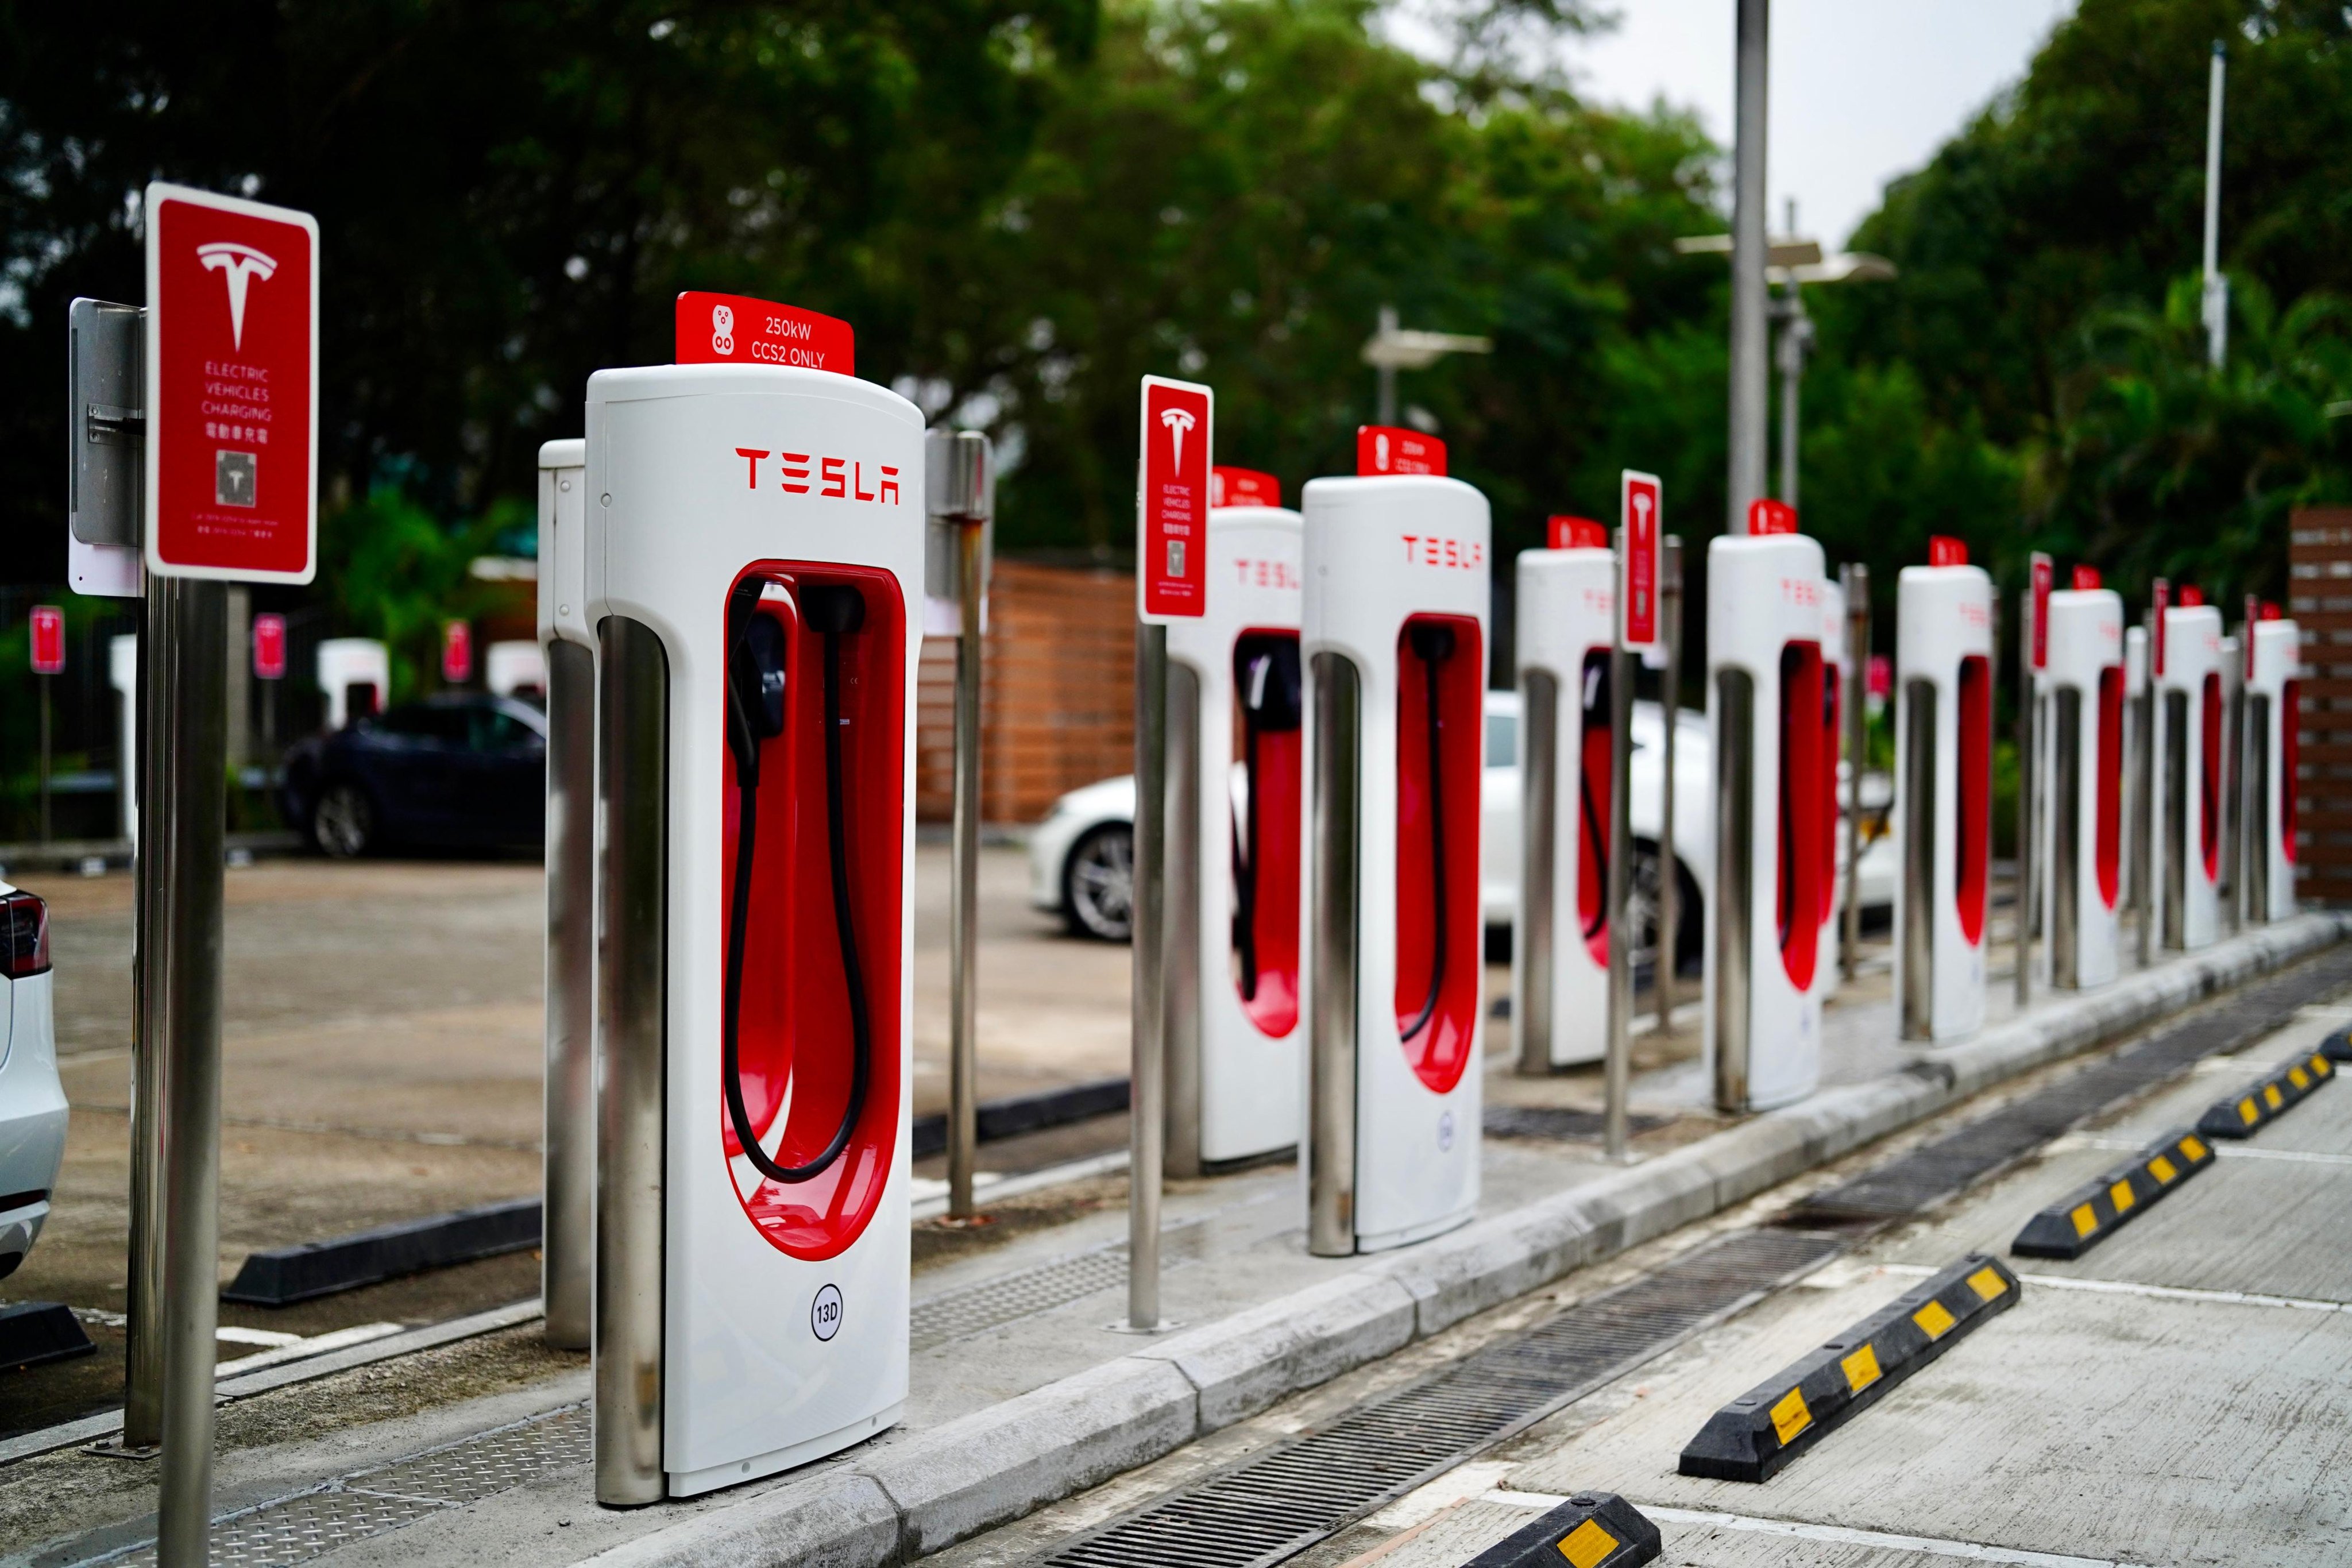 A line of Tesla electric vehicle charging stations stands ready at the Hyatt Regency in Sha Tin, Hong Kong. Photo: Handout